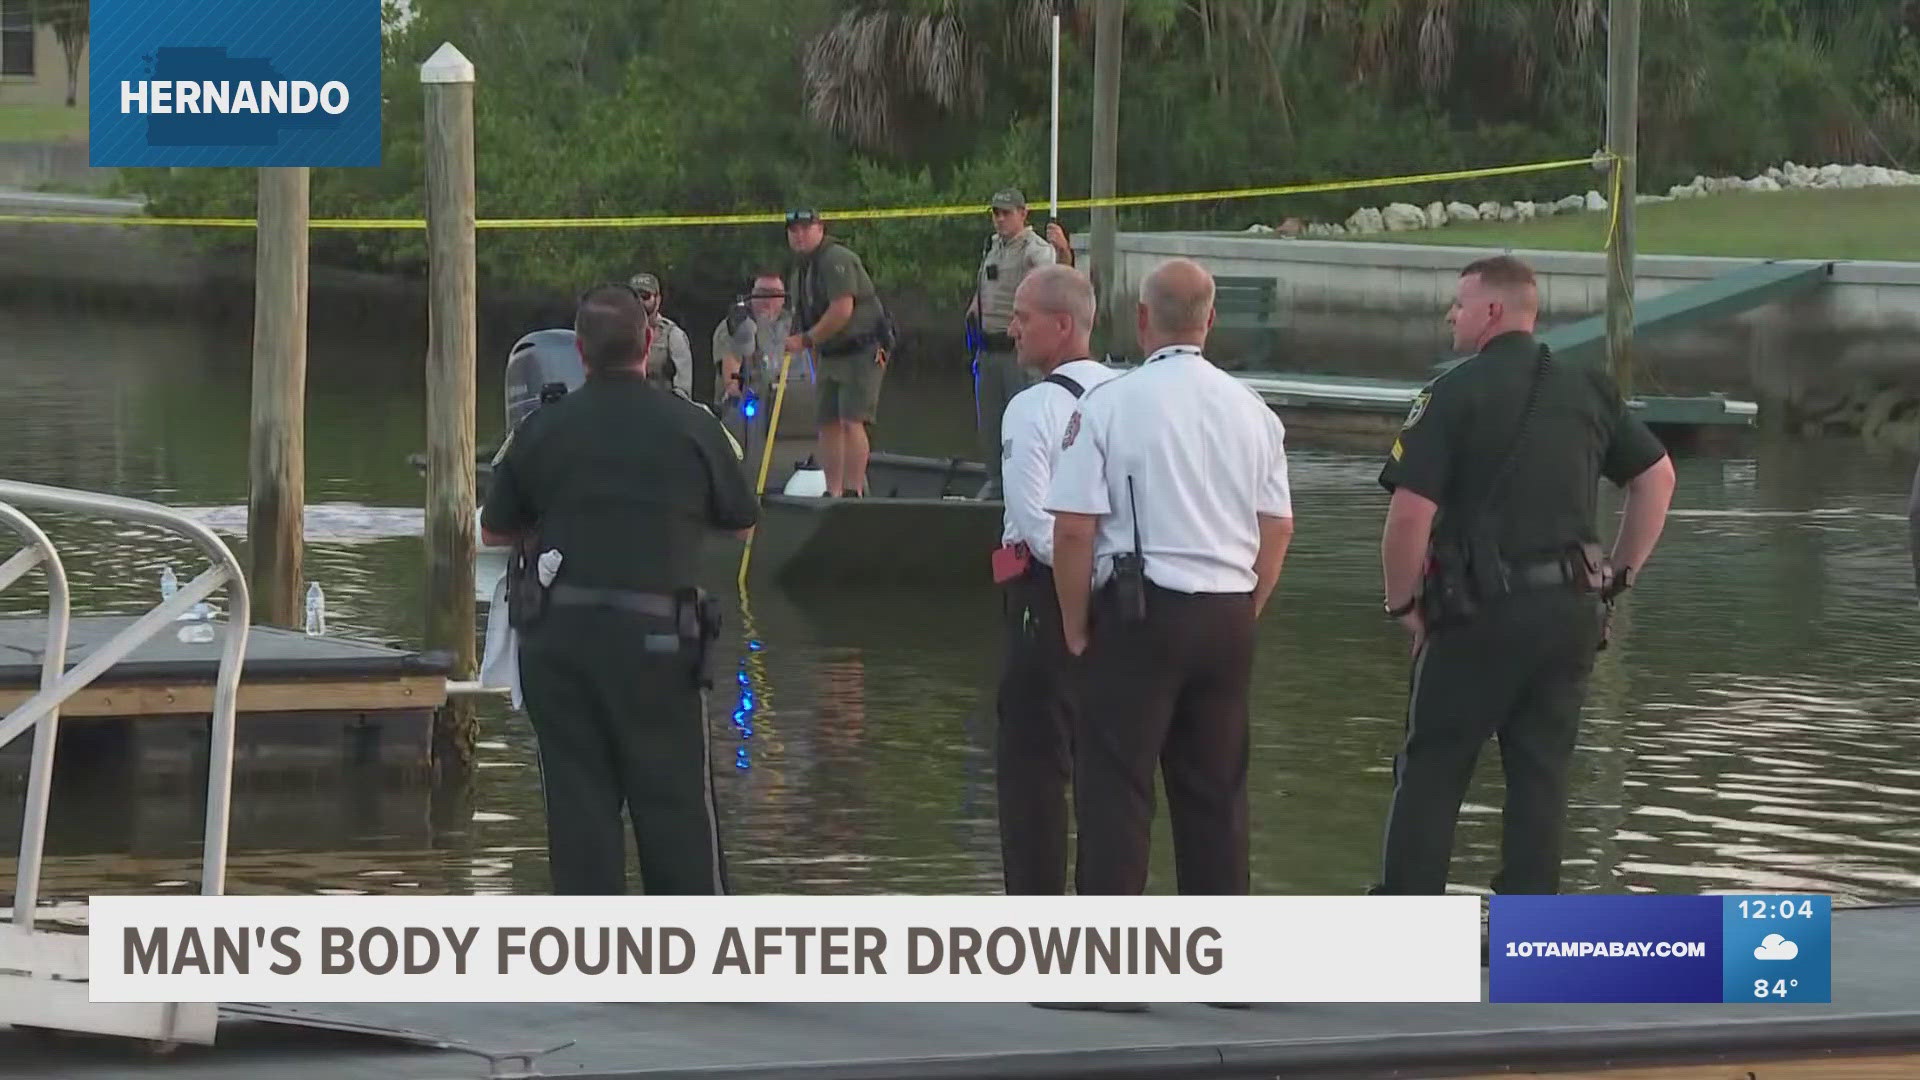 The sheriff’s office confirmed they found the body of a man who drowned in Hernando Beach.